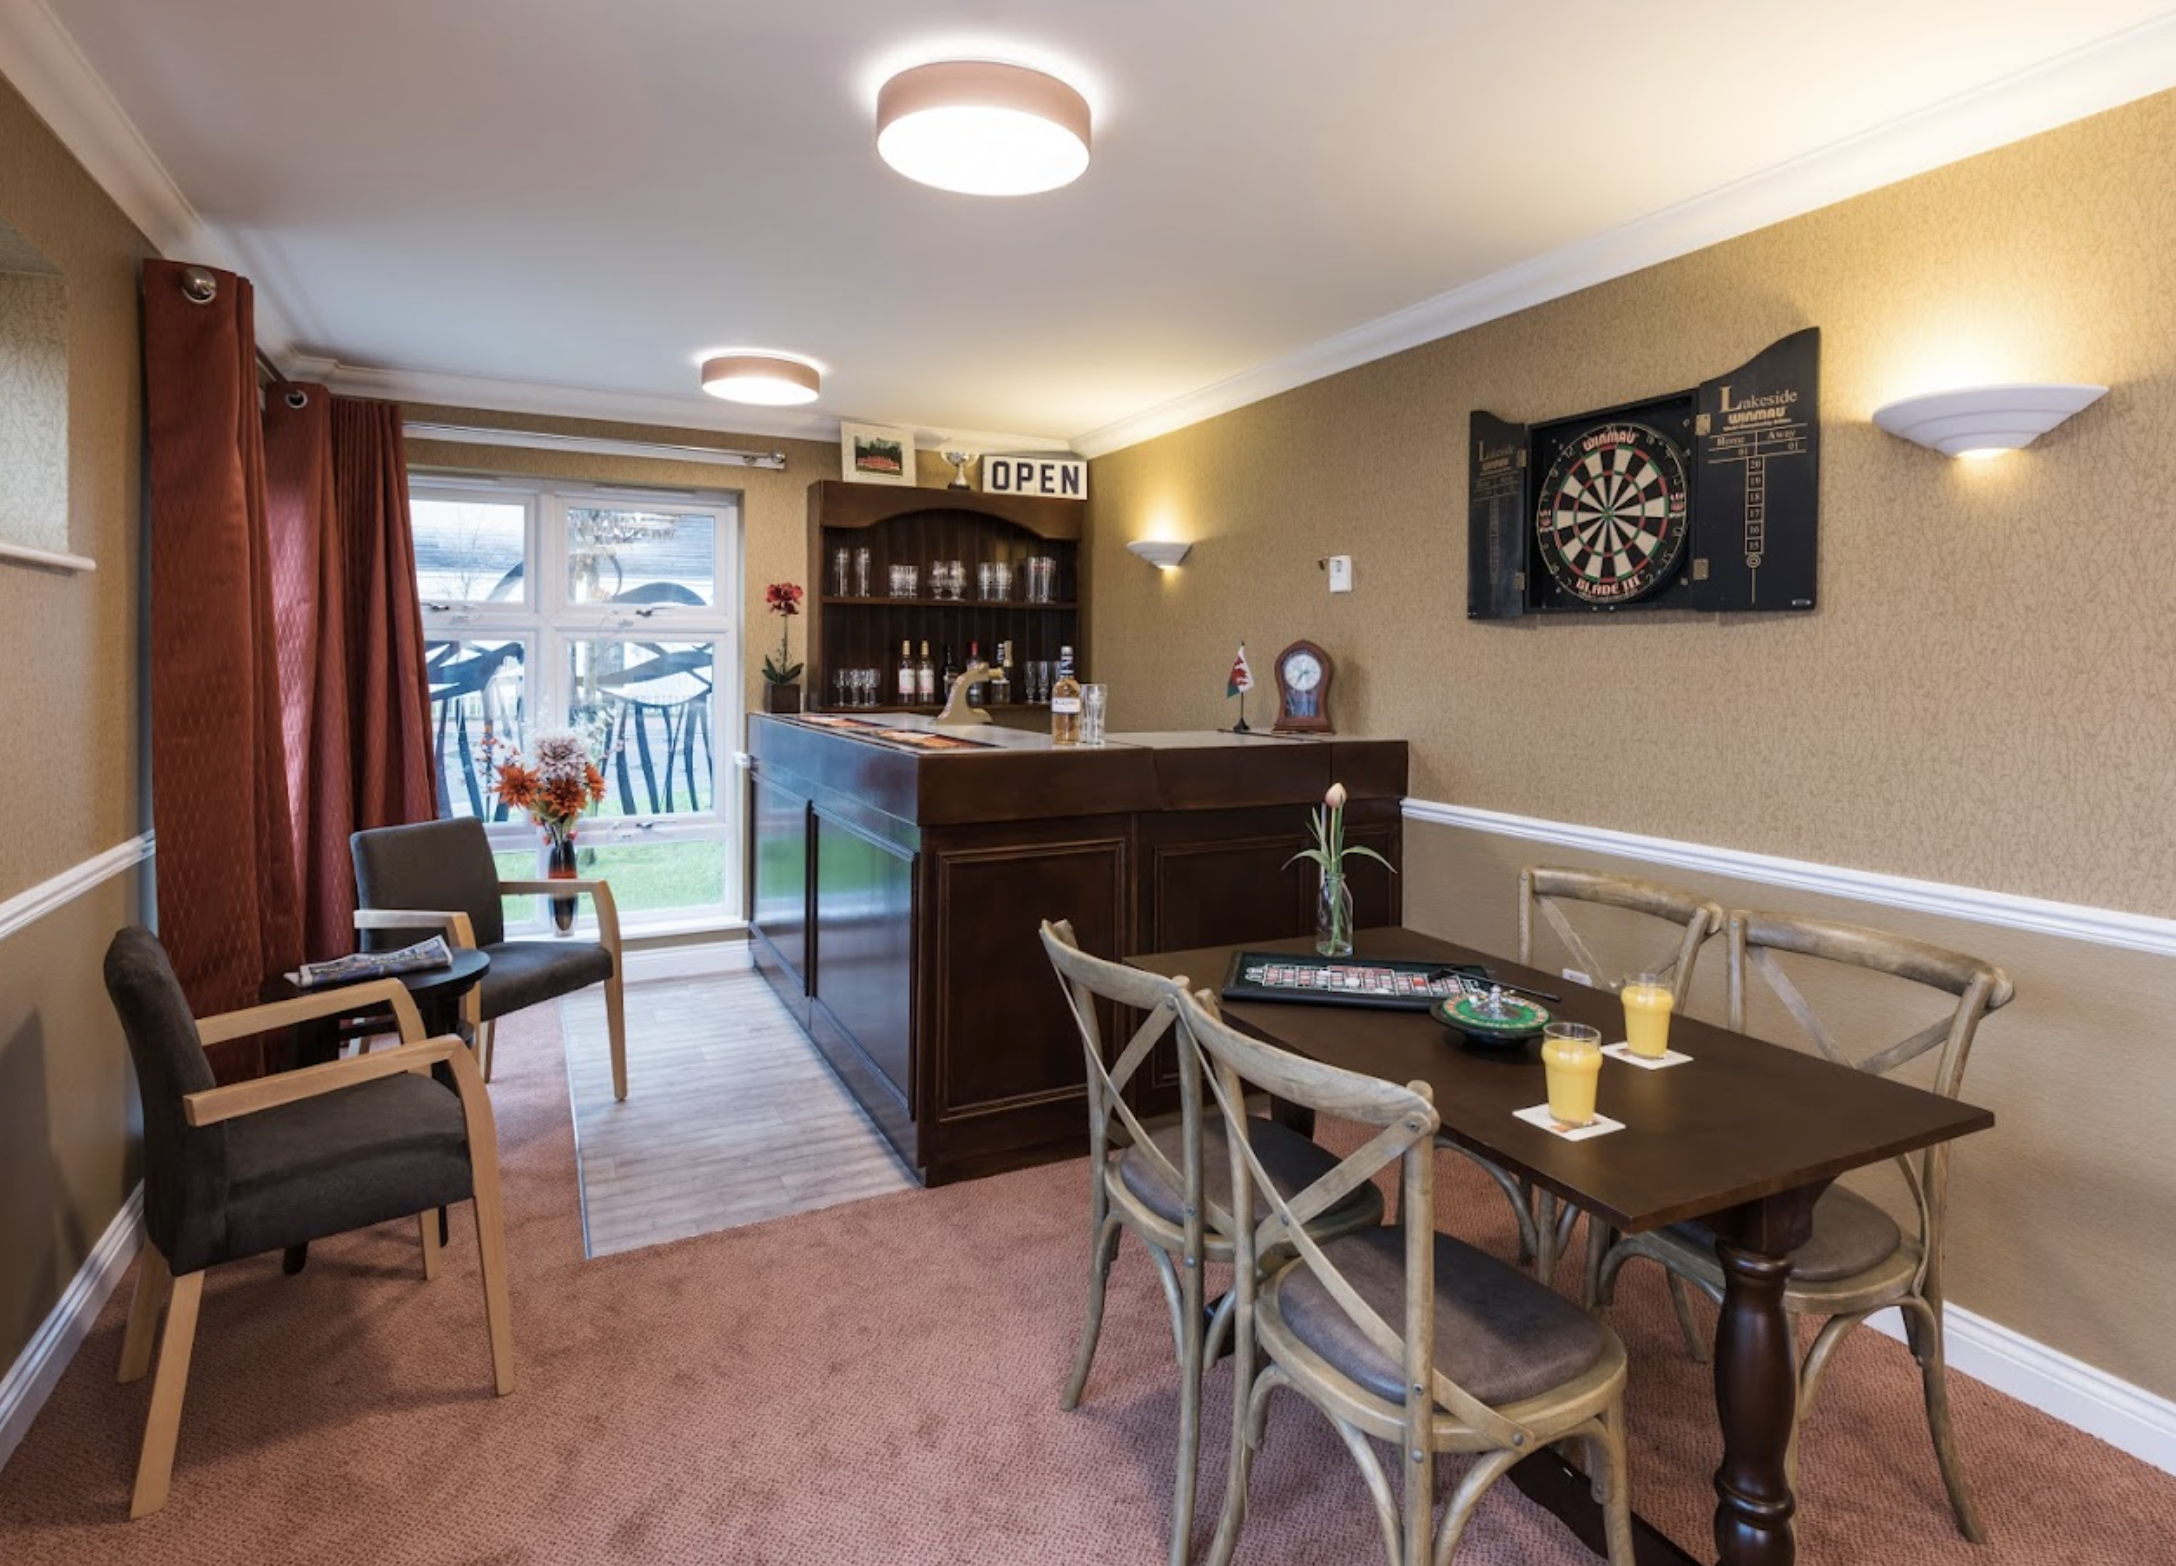 Pub of Shire Hall care home in Cardiff, Wales